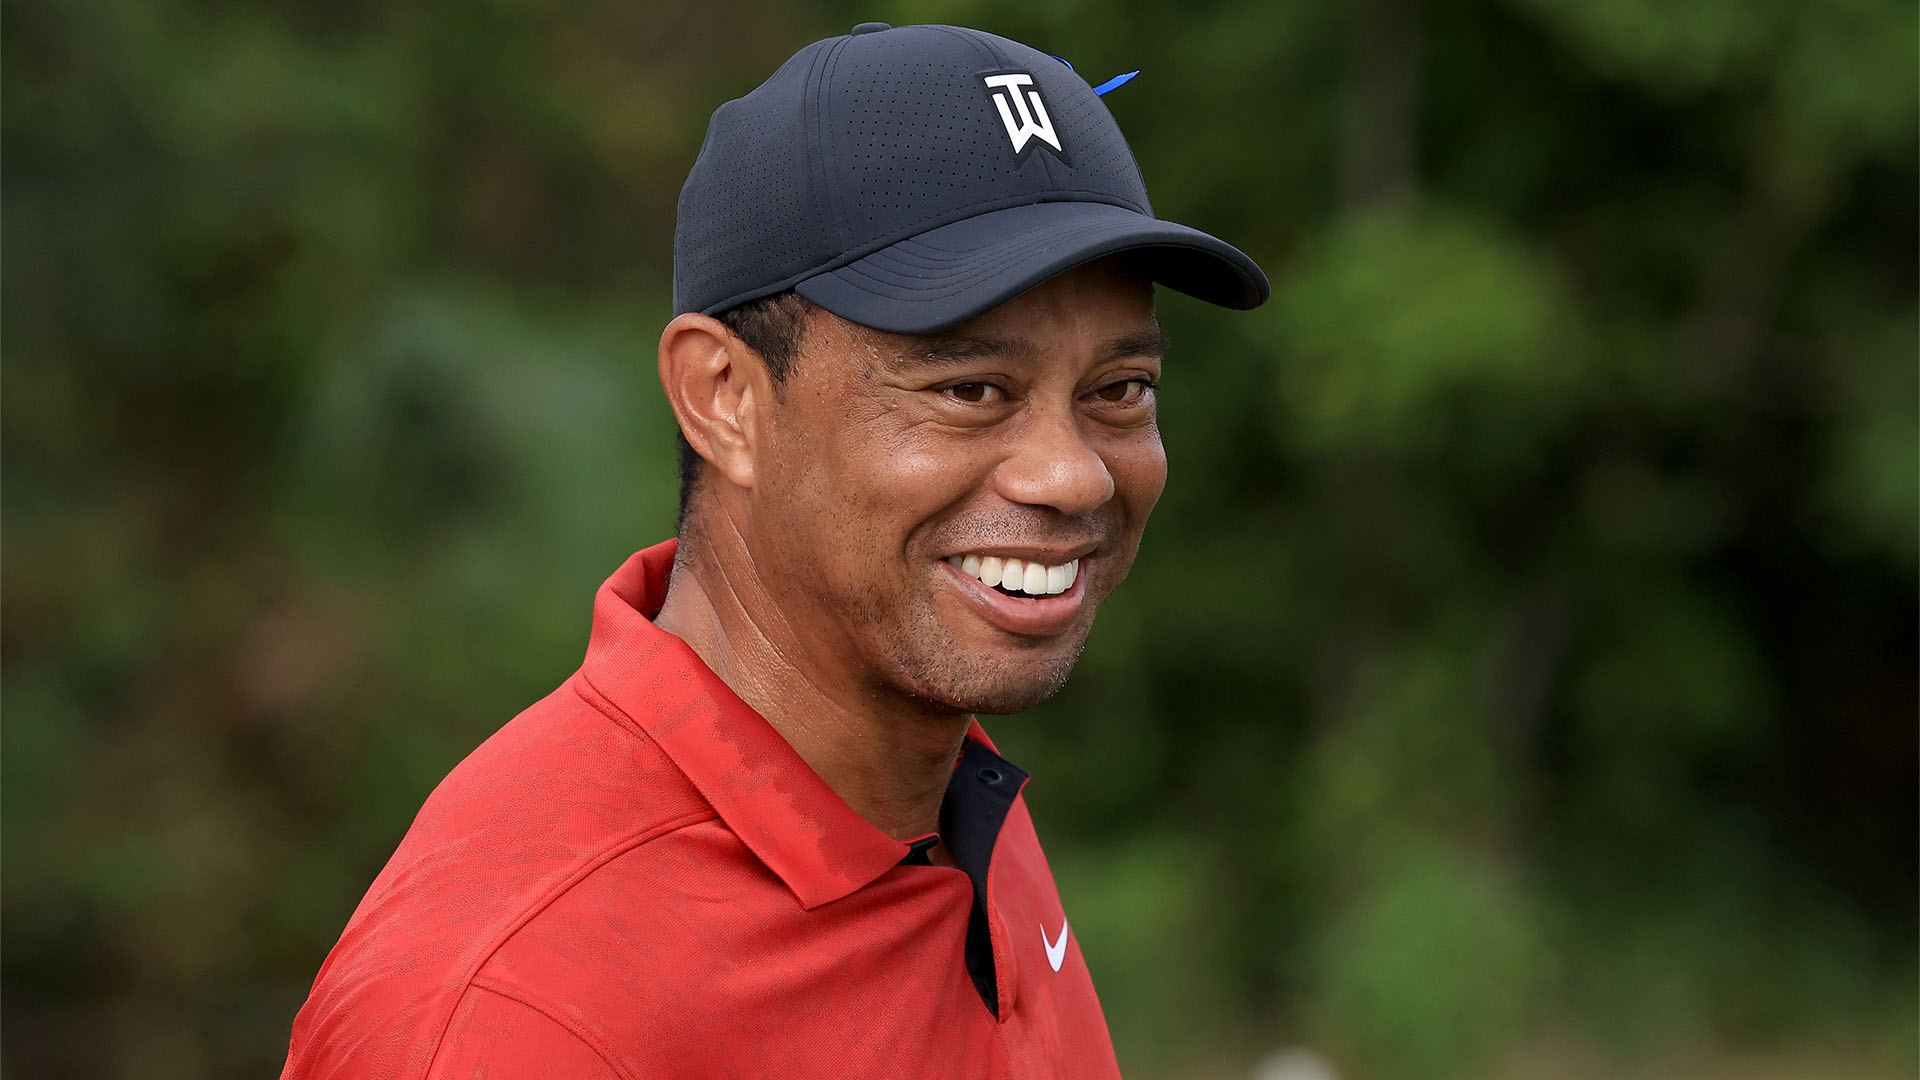 After Parting Ways With Nike, Tiger Woods Has Inked A New Apparel And Footwear Deal With TaylorMade